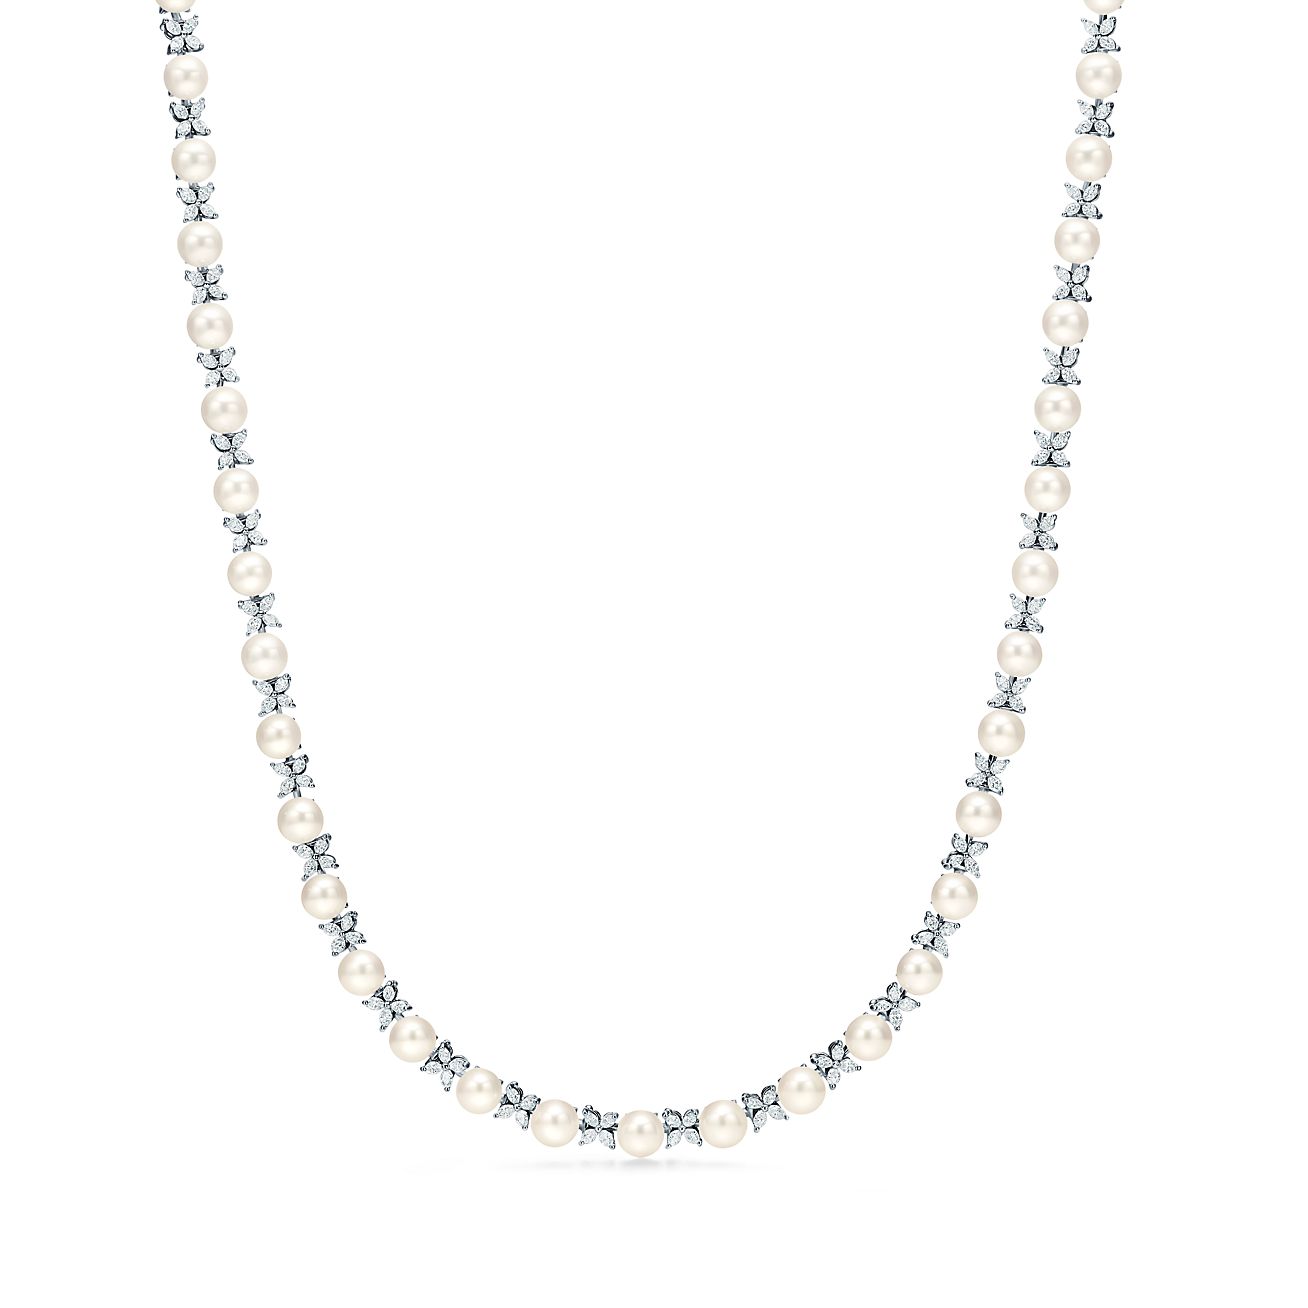 tiffany pearl and diamond necklace